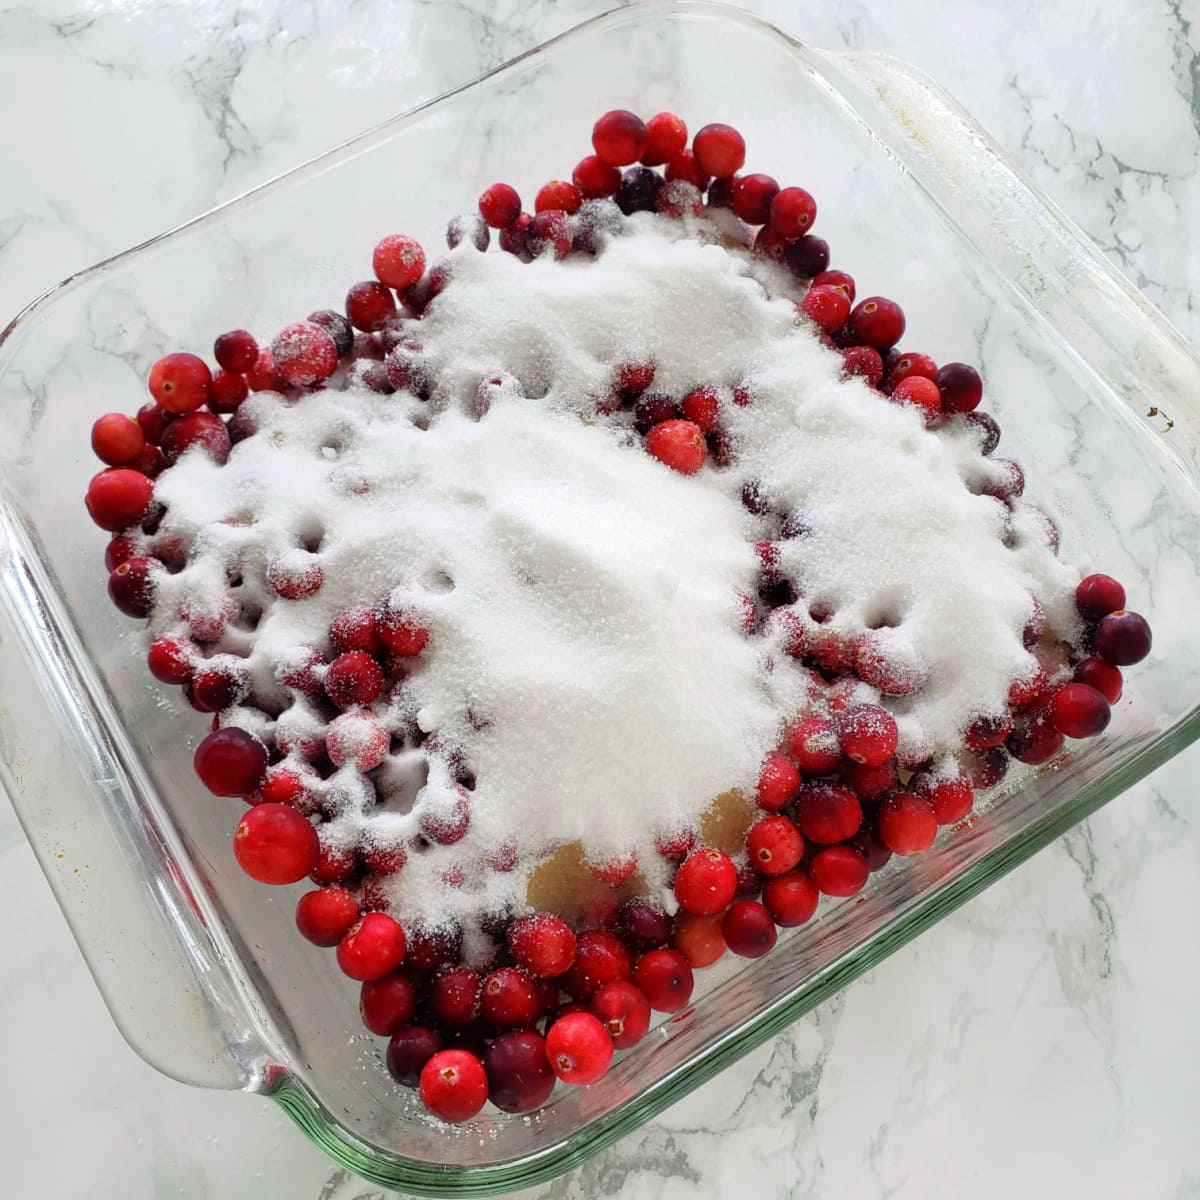 Clear glass baking dish with cranberries and lots of sugar